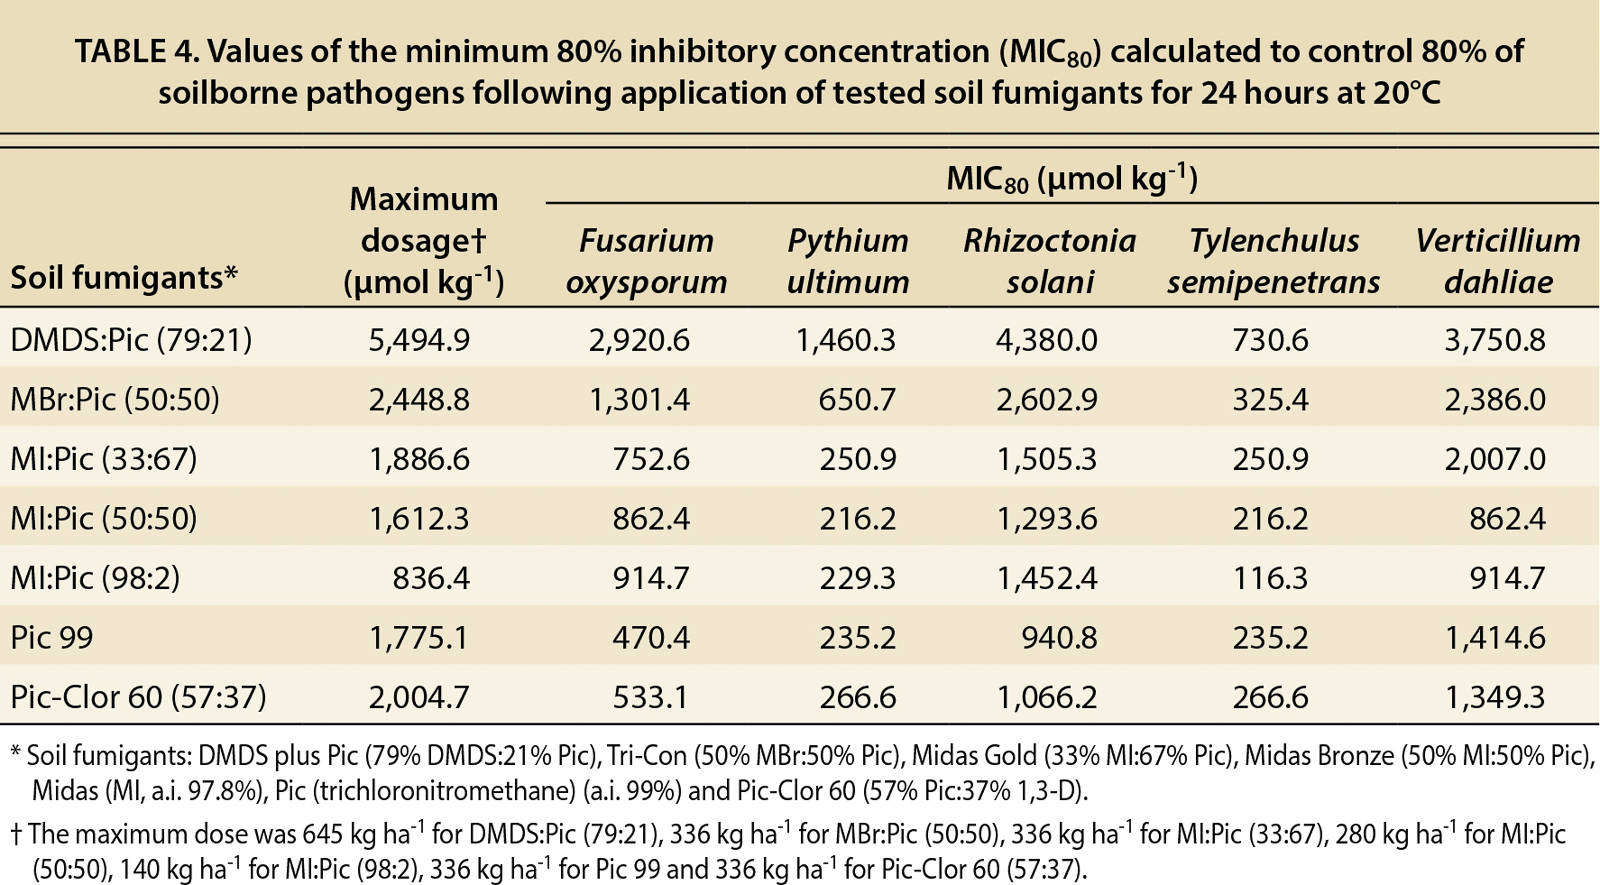 Values of the minimum 80% inhibitory concentration (MIC80) calculated to control 80% of soilborne pathogens following application of tested soil fumigants for 24 hours at 20°C